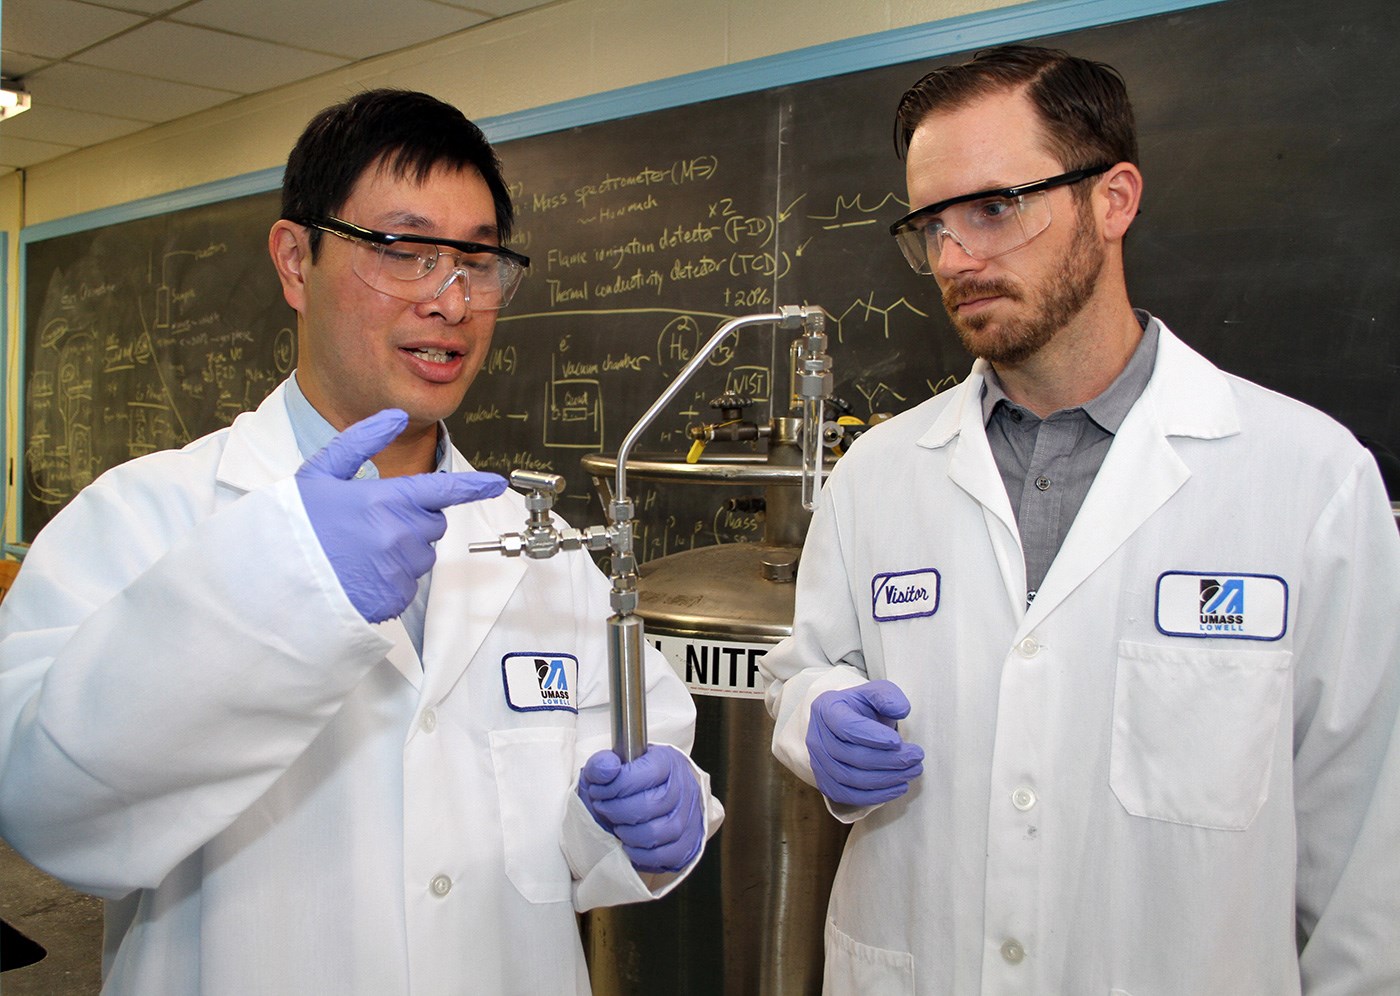 Asst. Profs. Hsi-Wu Wong and Hunter Mack examine the reactor used in creating biofuels in the lab.